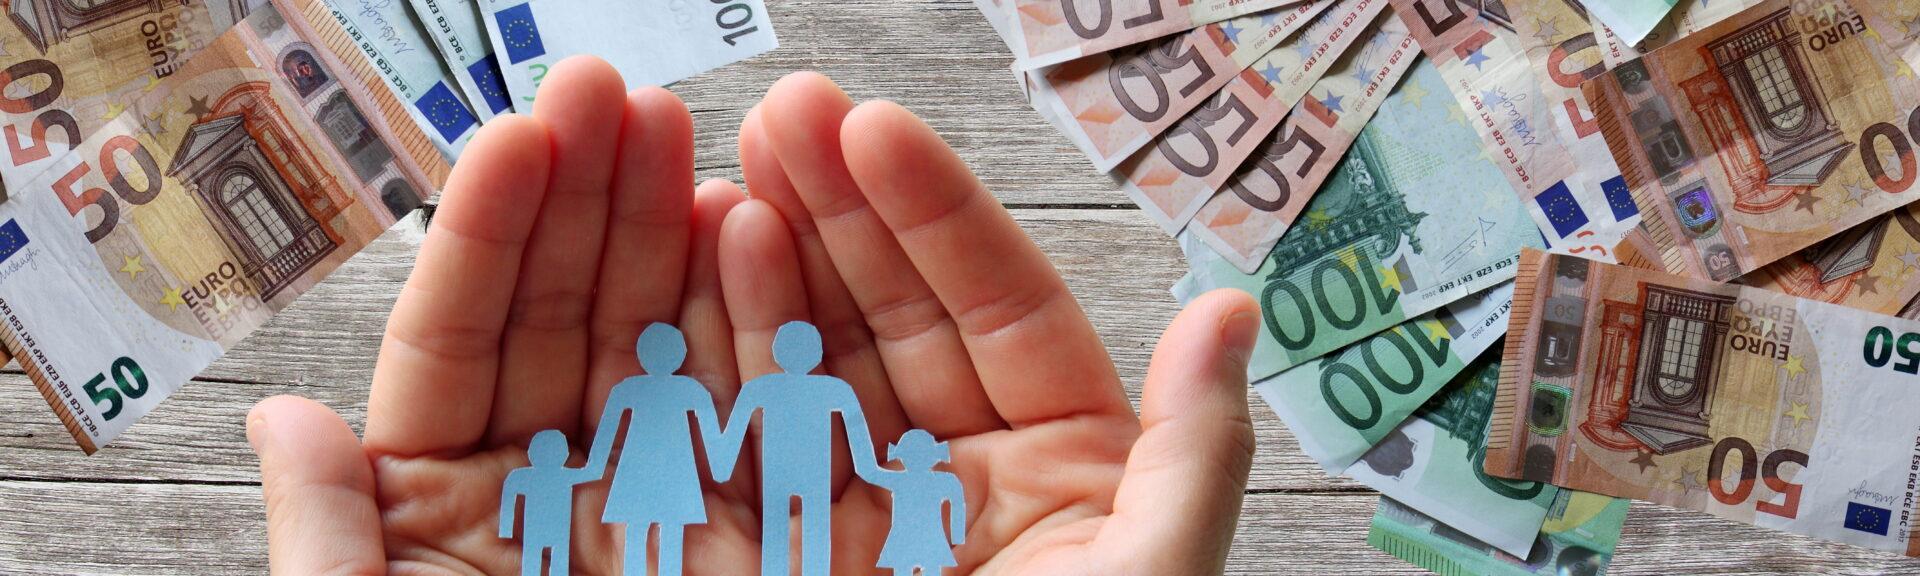 Paper family in hands on wooden background with euro banknotes